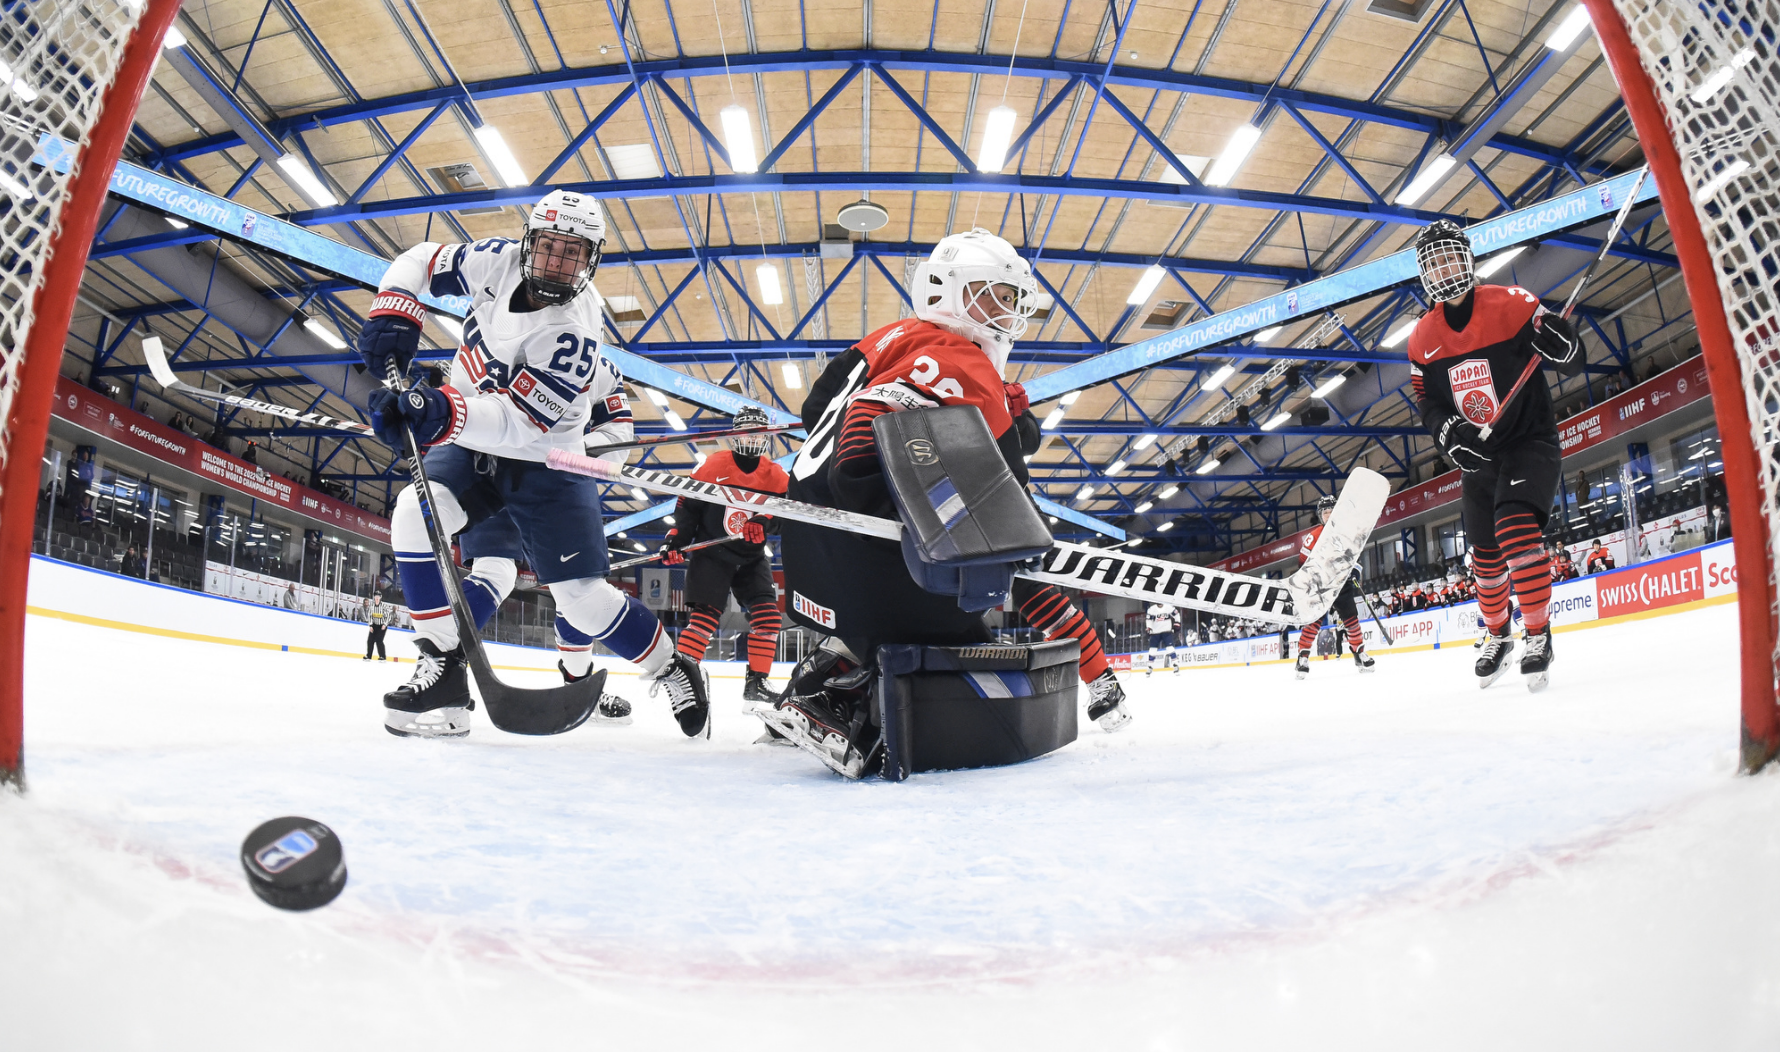 A view from inside the net as Carpenter scores on Masuhara. Masuhara is on her knees looking back and Carpenter is upright following through on her shot off to Masuhara's left. There are multiple Japanese skater in the background. Carpenter is in white, while the Japanese players are in black and red.